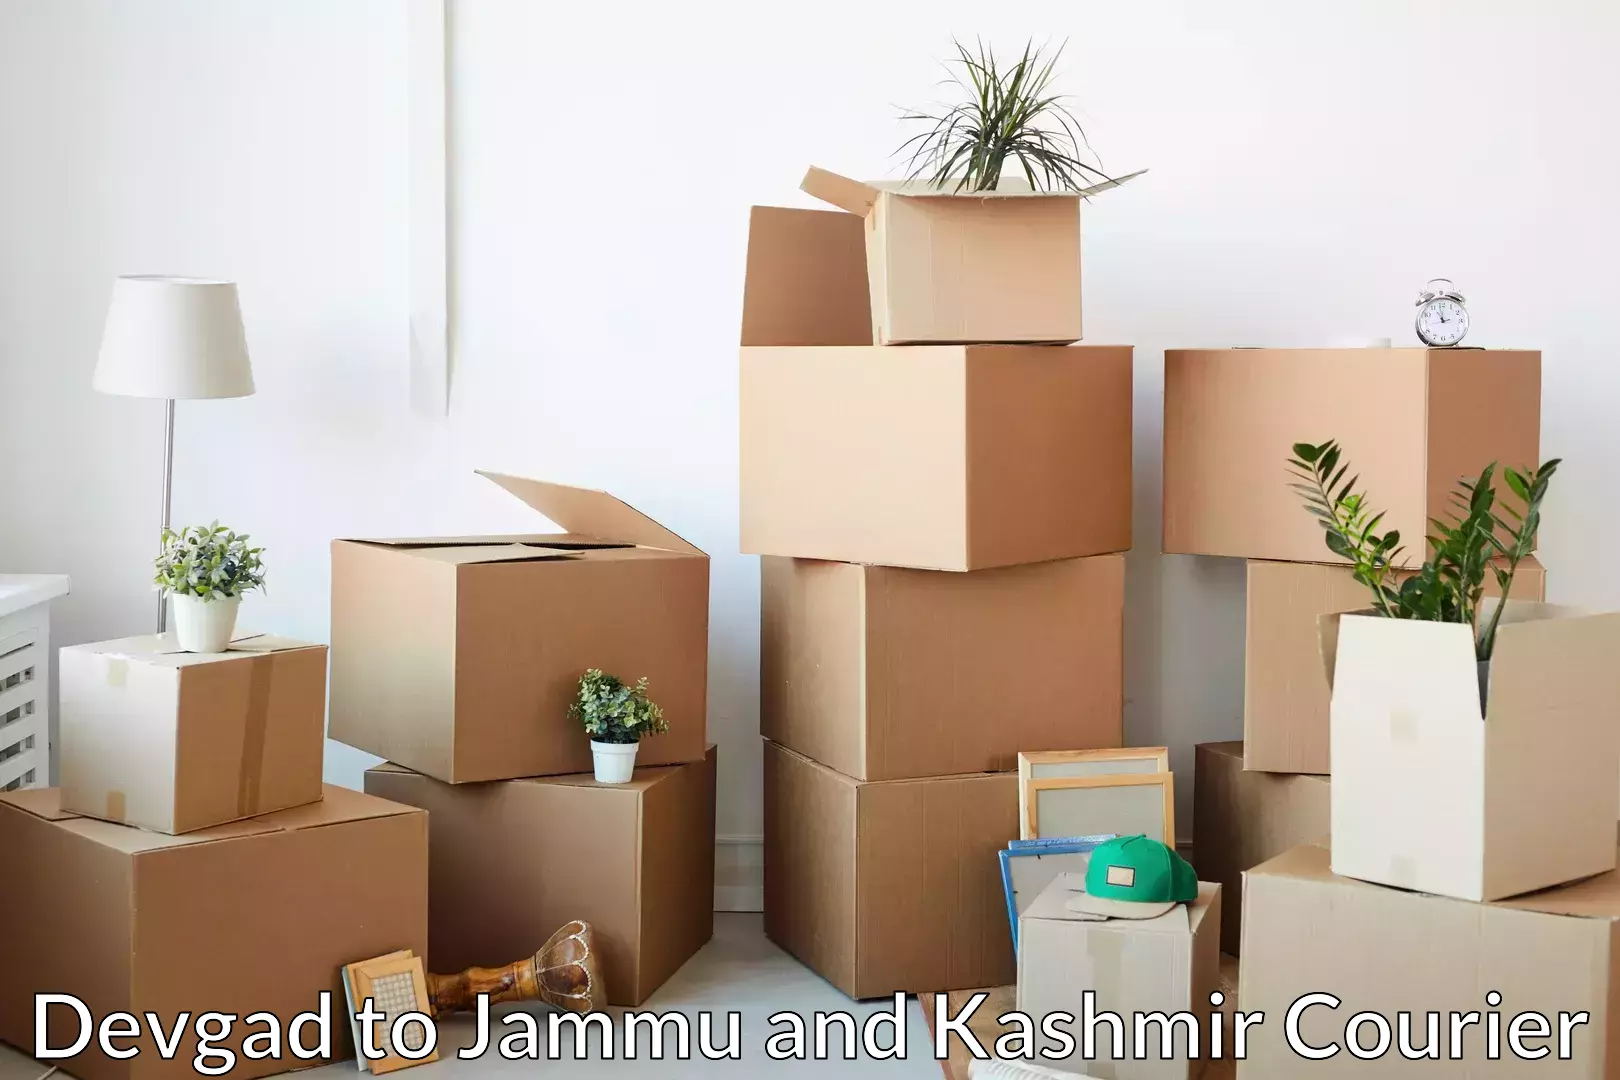 Home relocation experts Devgad to Baramulla